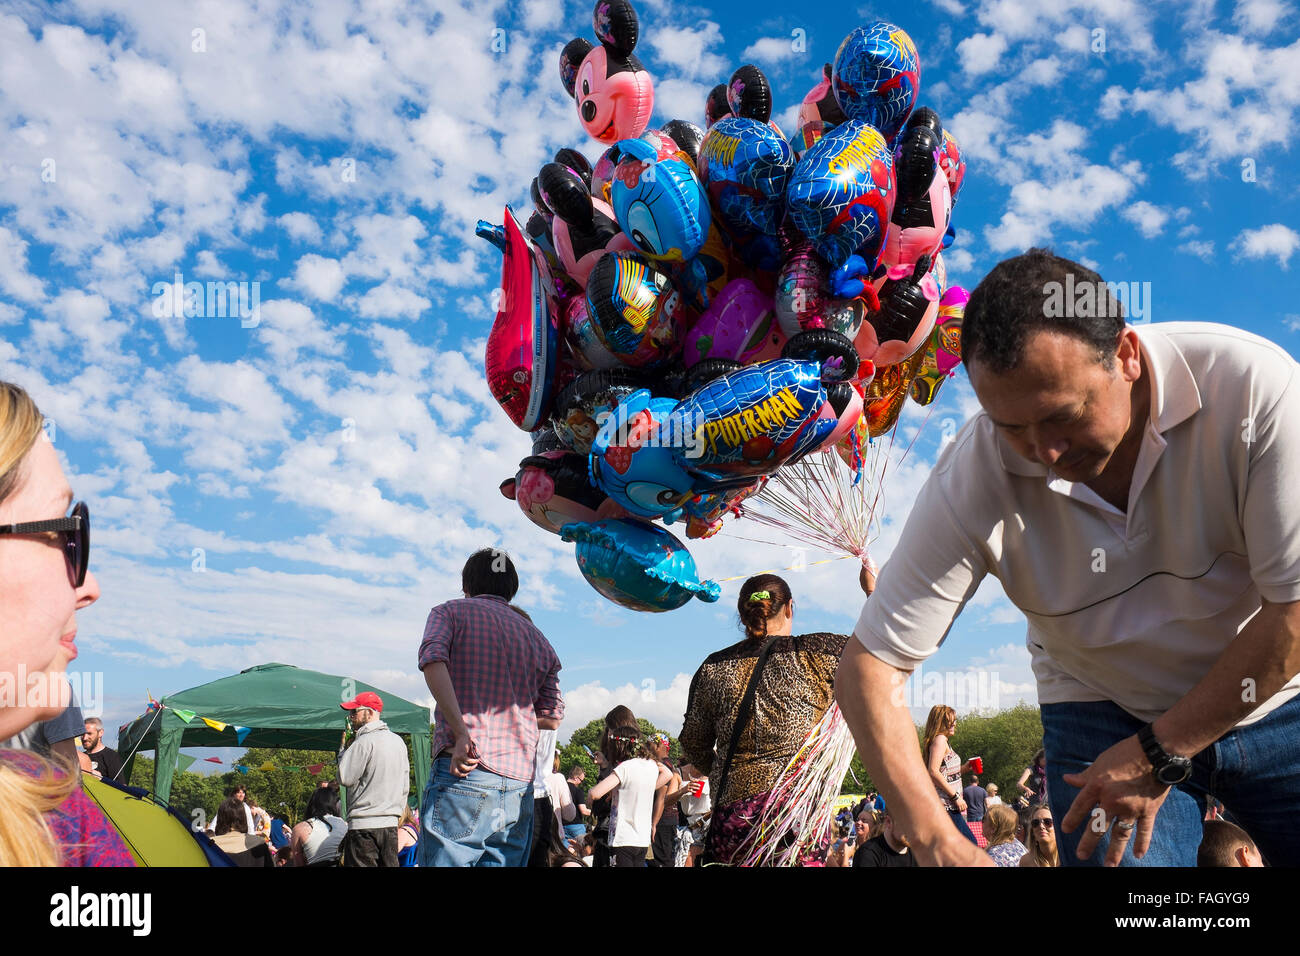 Selling balloons in the crowd at the annual Africa Oye festival in Liverpool, one of the UK's largest free summer music festivals Stock Photo